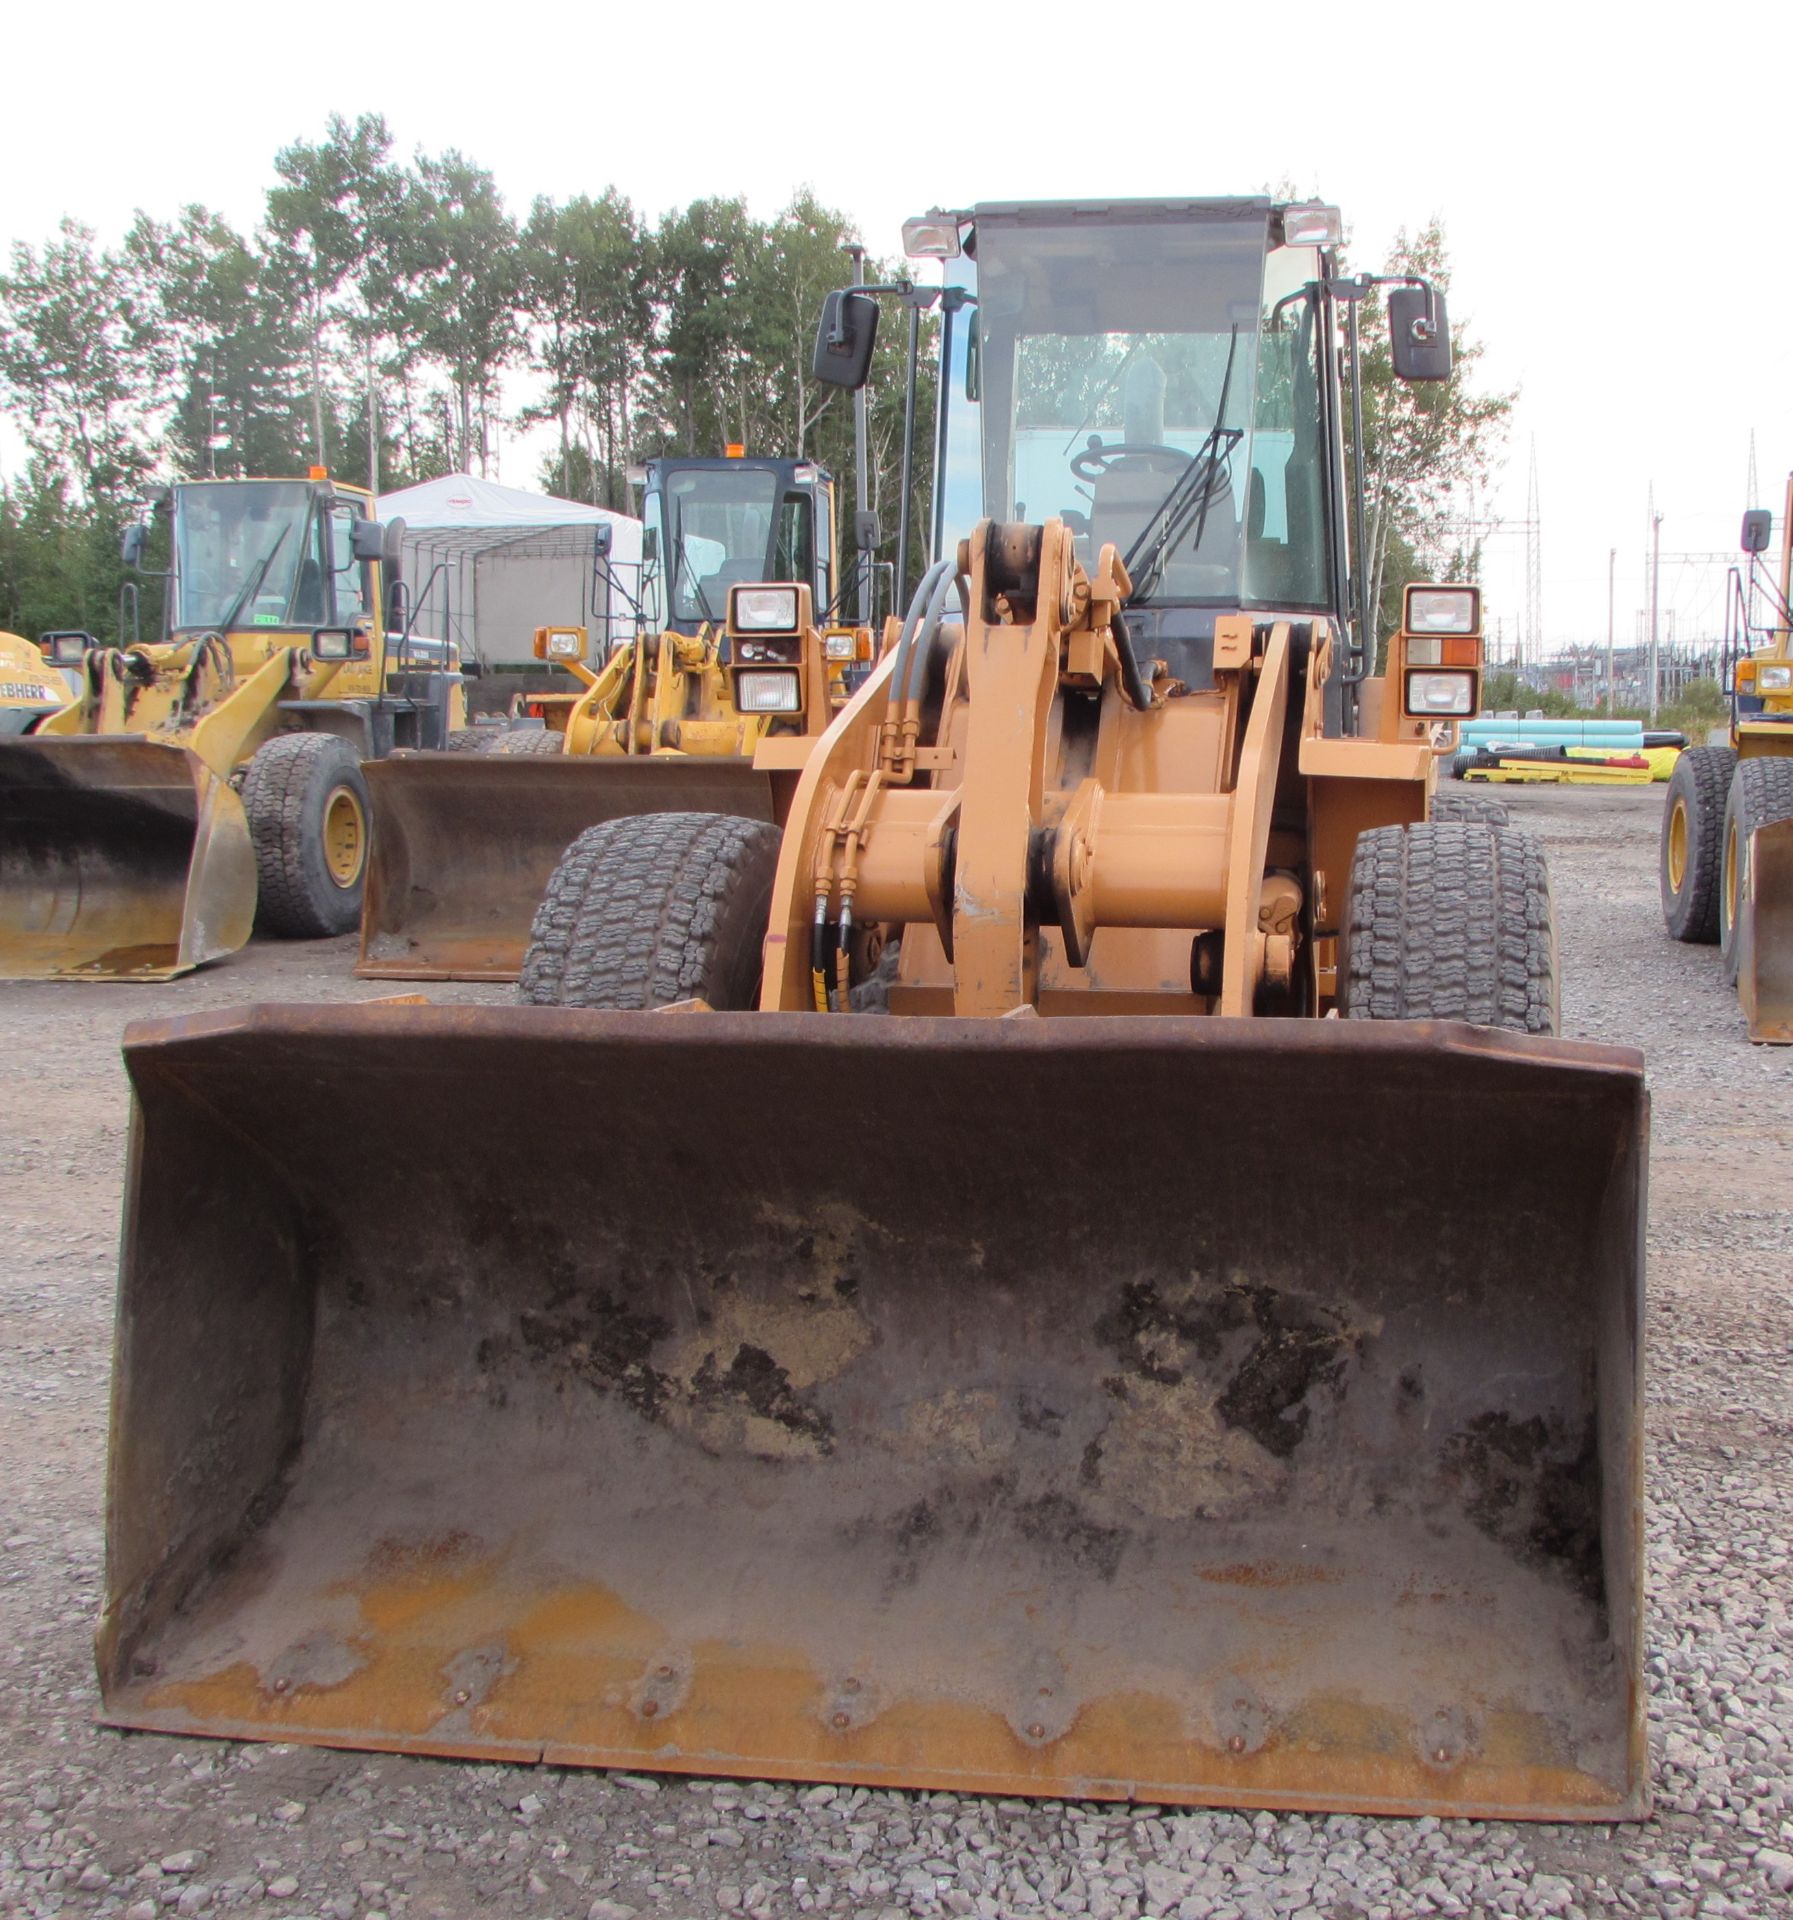 1995 CASE 721B WHEEL LOADER C/W 6 CYLINDER CASE 6T-830 140 HP ENGINE, APPROX. 12,356 HRS (SHOWING ON - Image 2 of 7